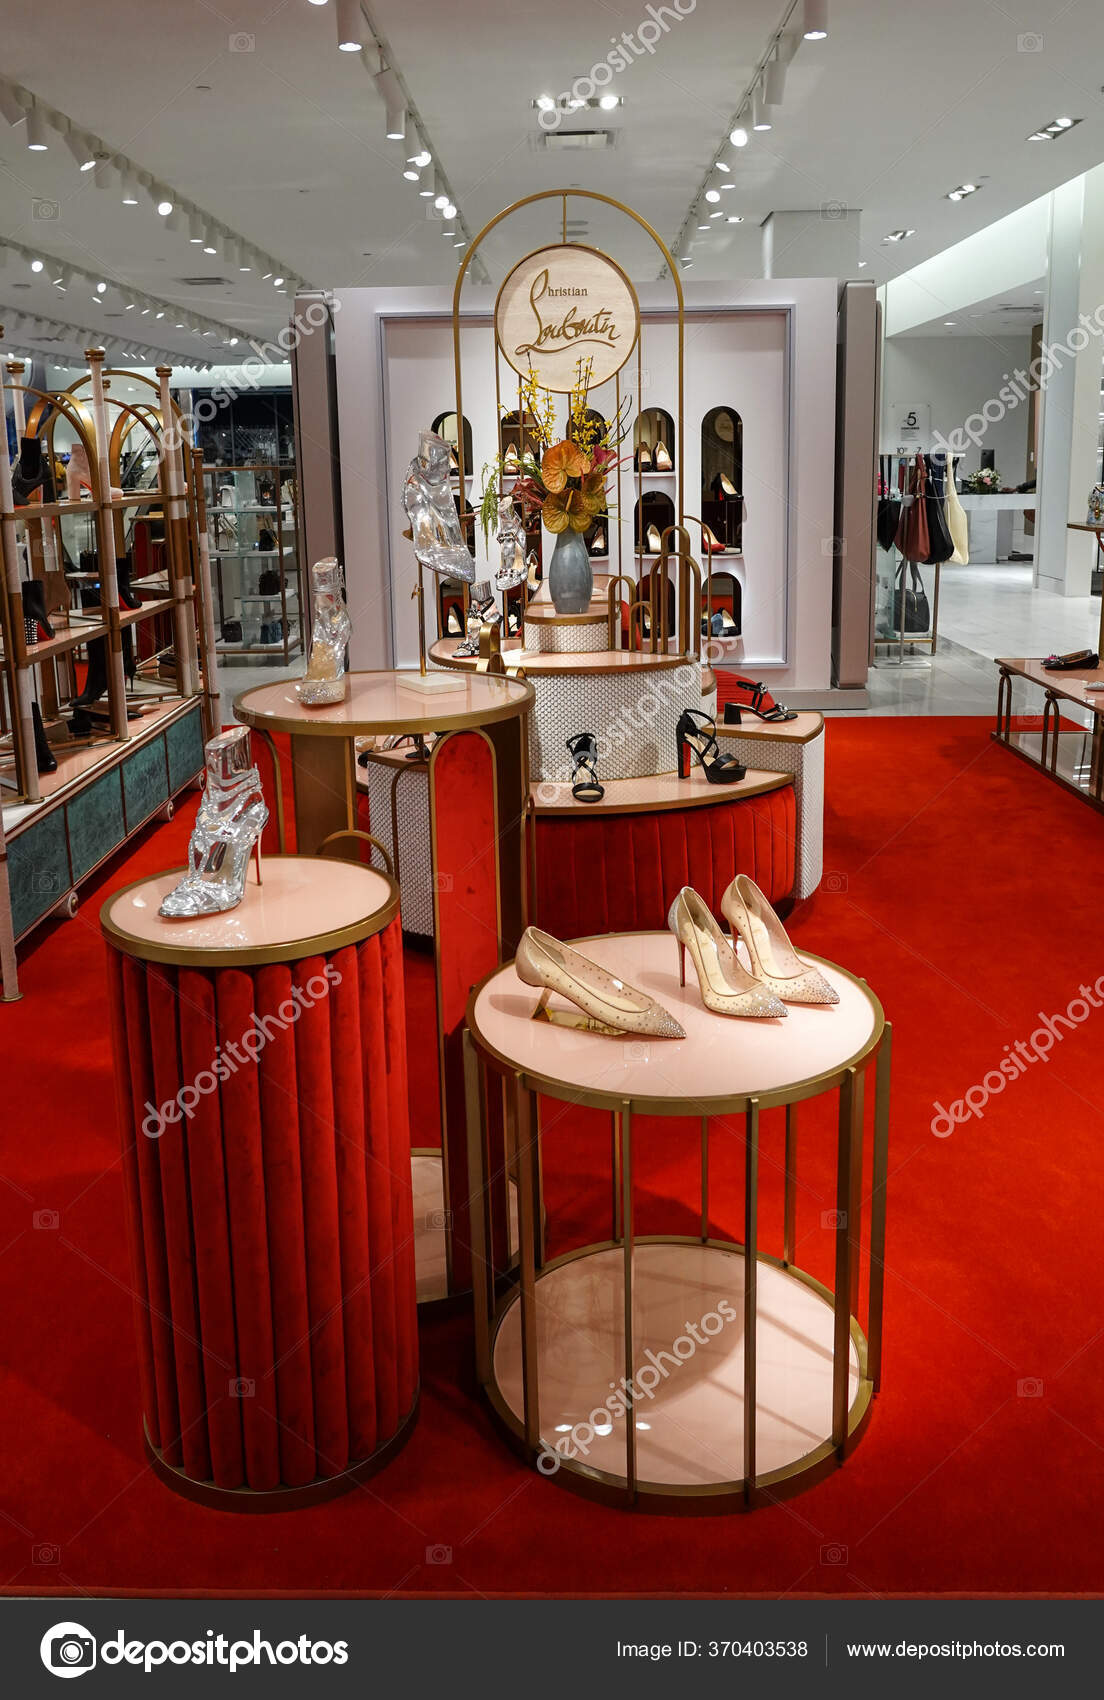 Neiman's Immersive Engagement With Christian Louboutin – WWD